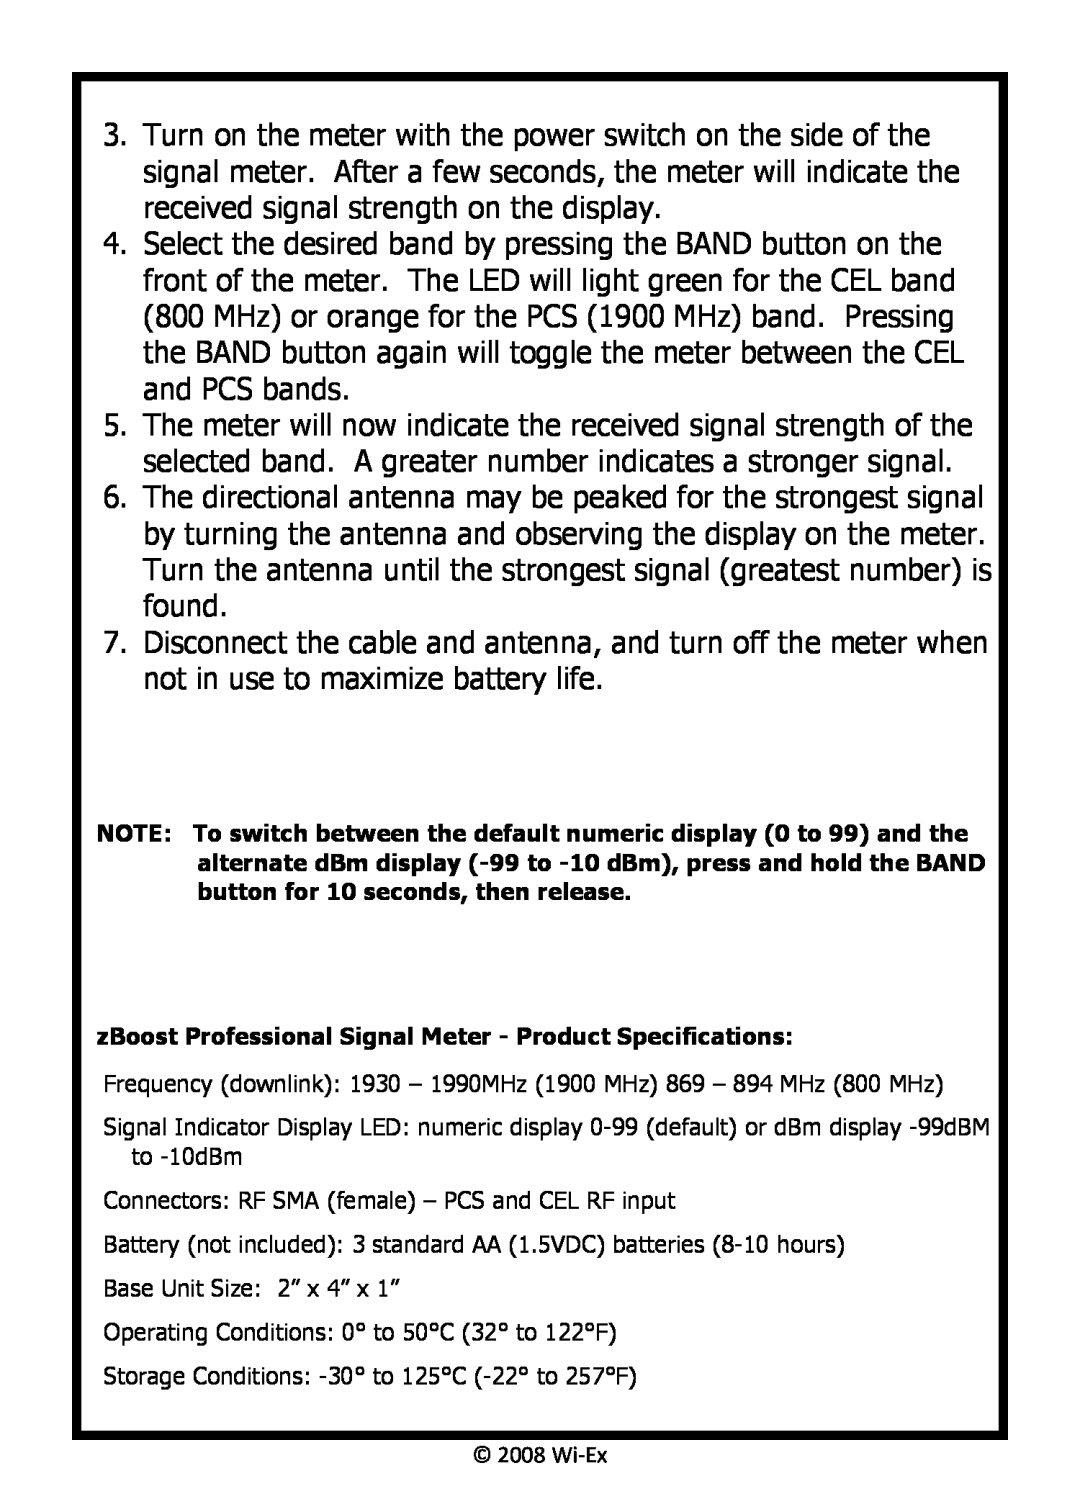 Wi-Ex YX699 zBoost Professional Signal Meter - Product Specifications, Connectors RF SMA female - PCS and CEL RF input 